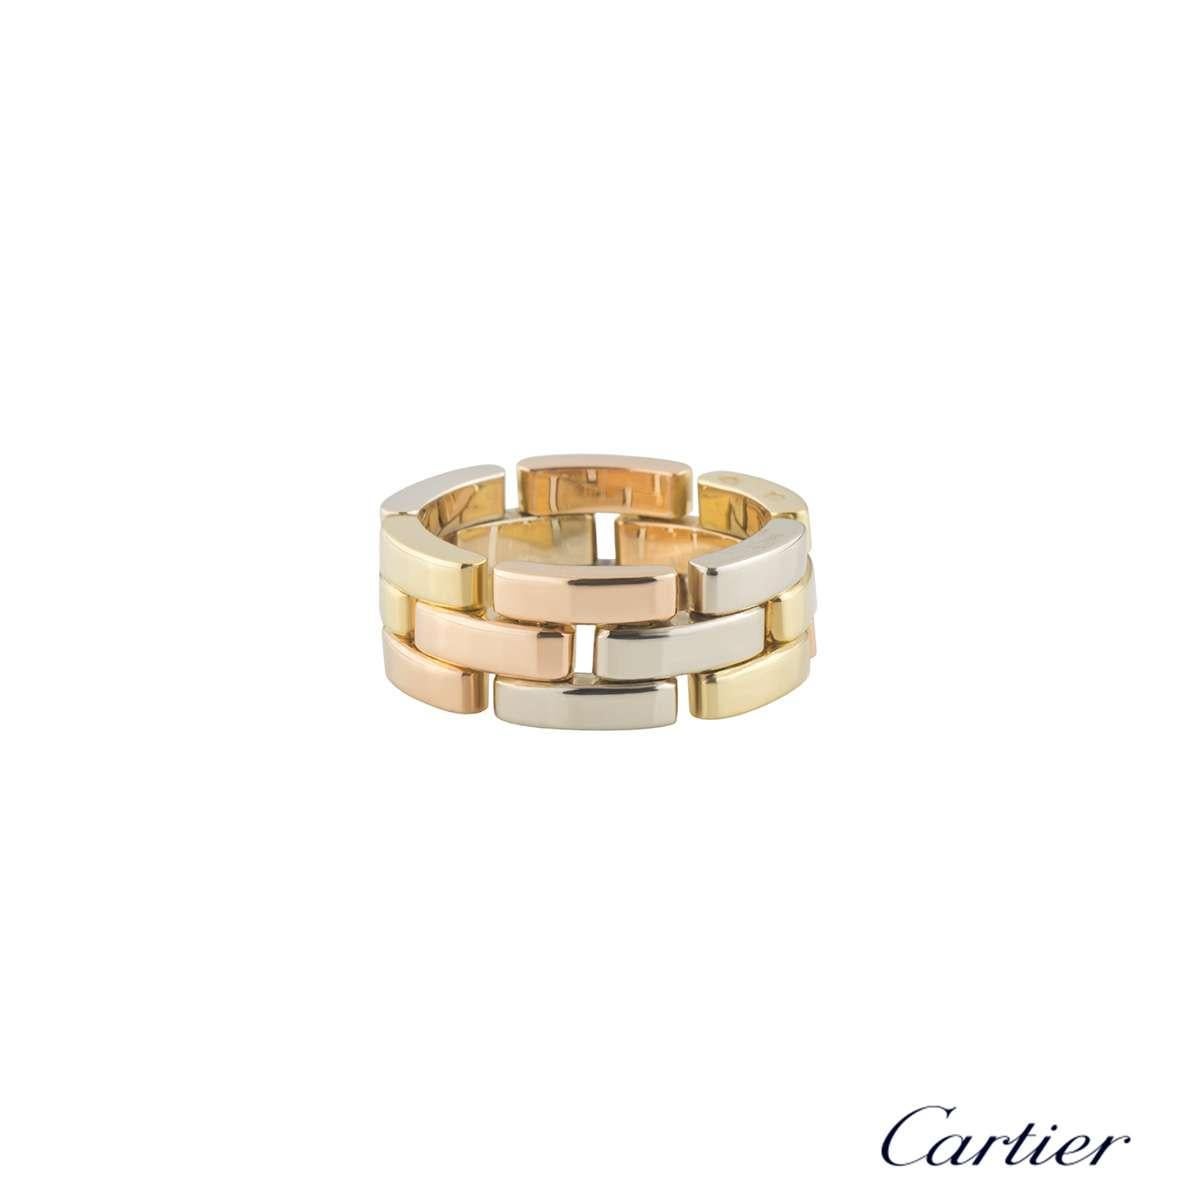 A stunning 18k yellow, white and rose gold Cartier Maillon Panthere ring from the Links and Chains collection. The ring comprises of 18 open brick work design panels. The ring is 8mm in width and is a size UK N½, EU 54 and US 6 3⁄4 with a gross